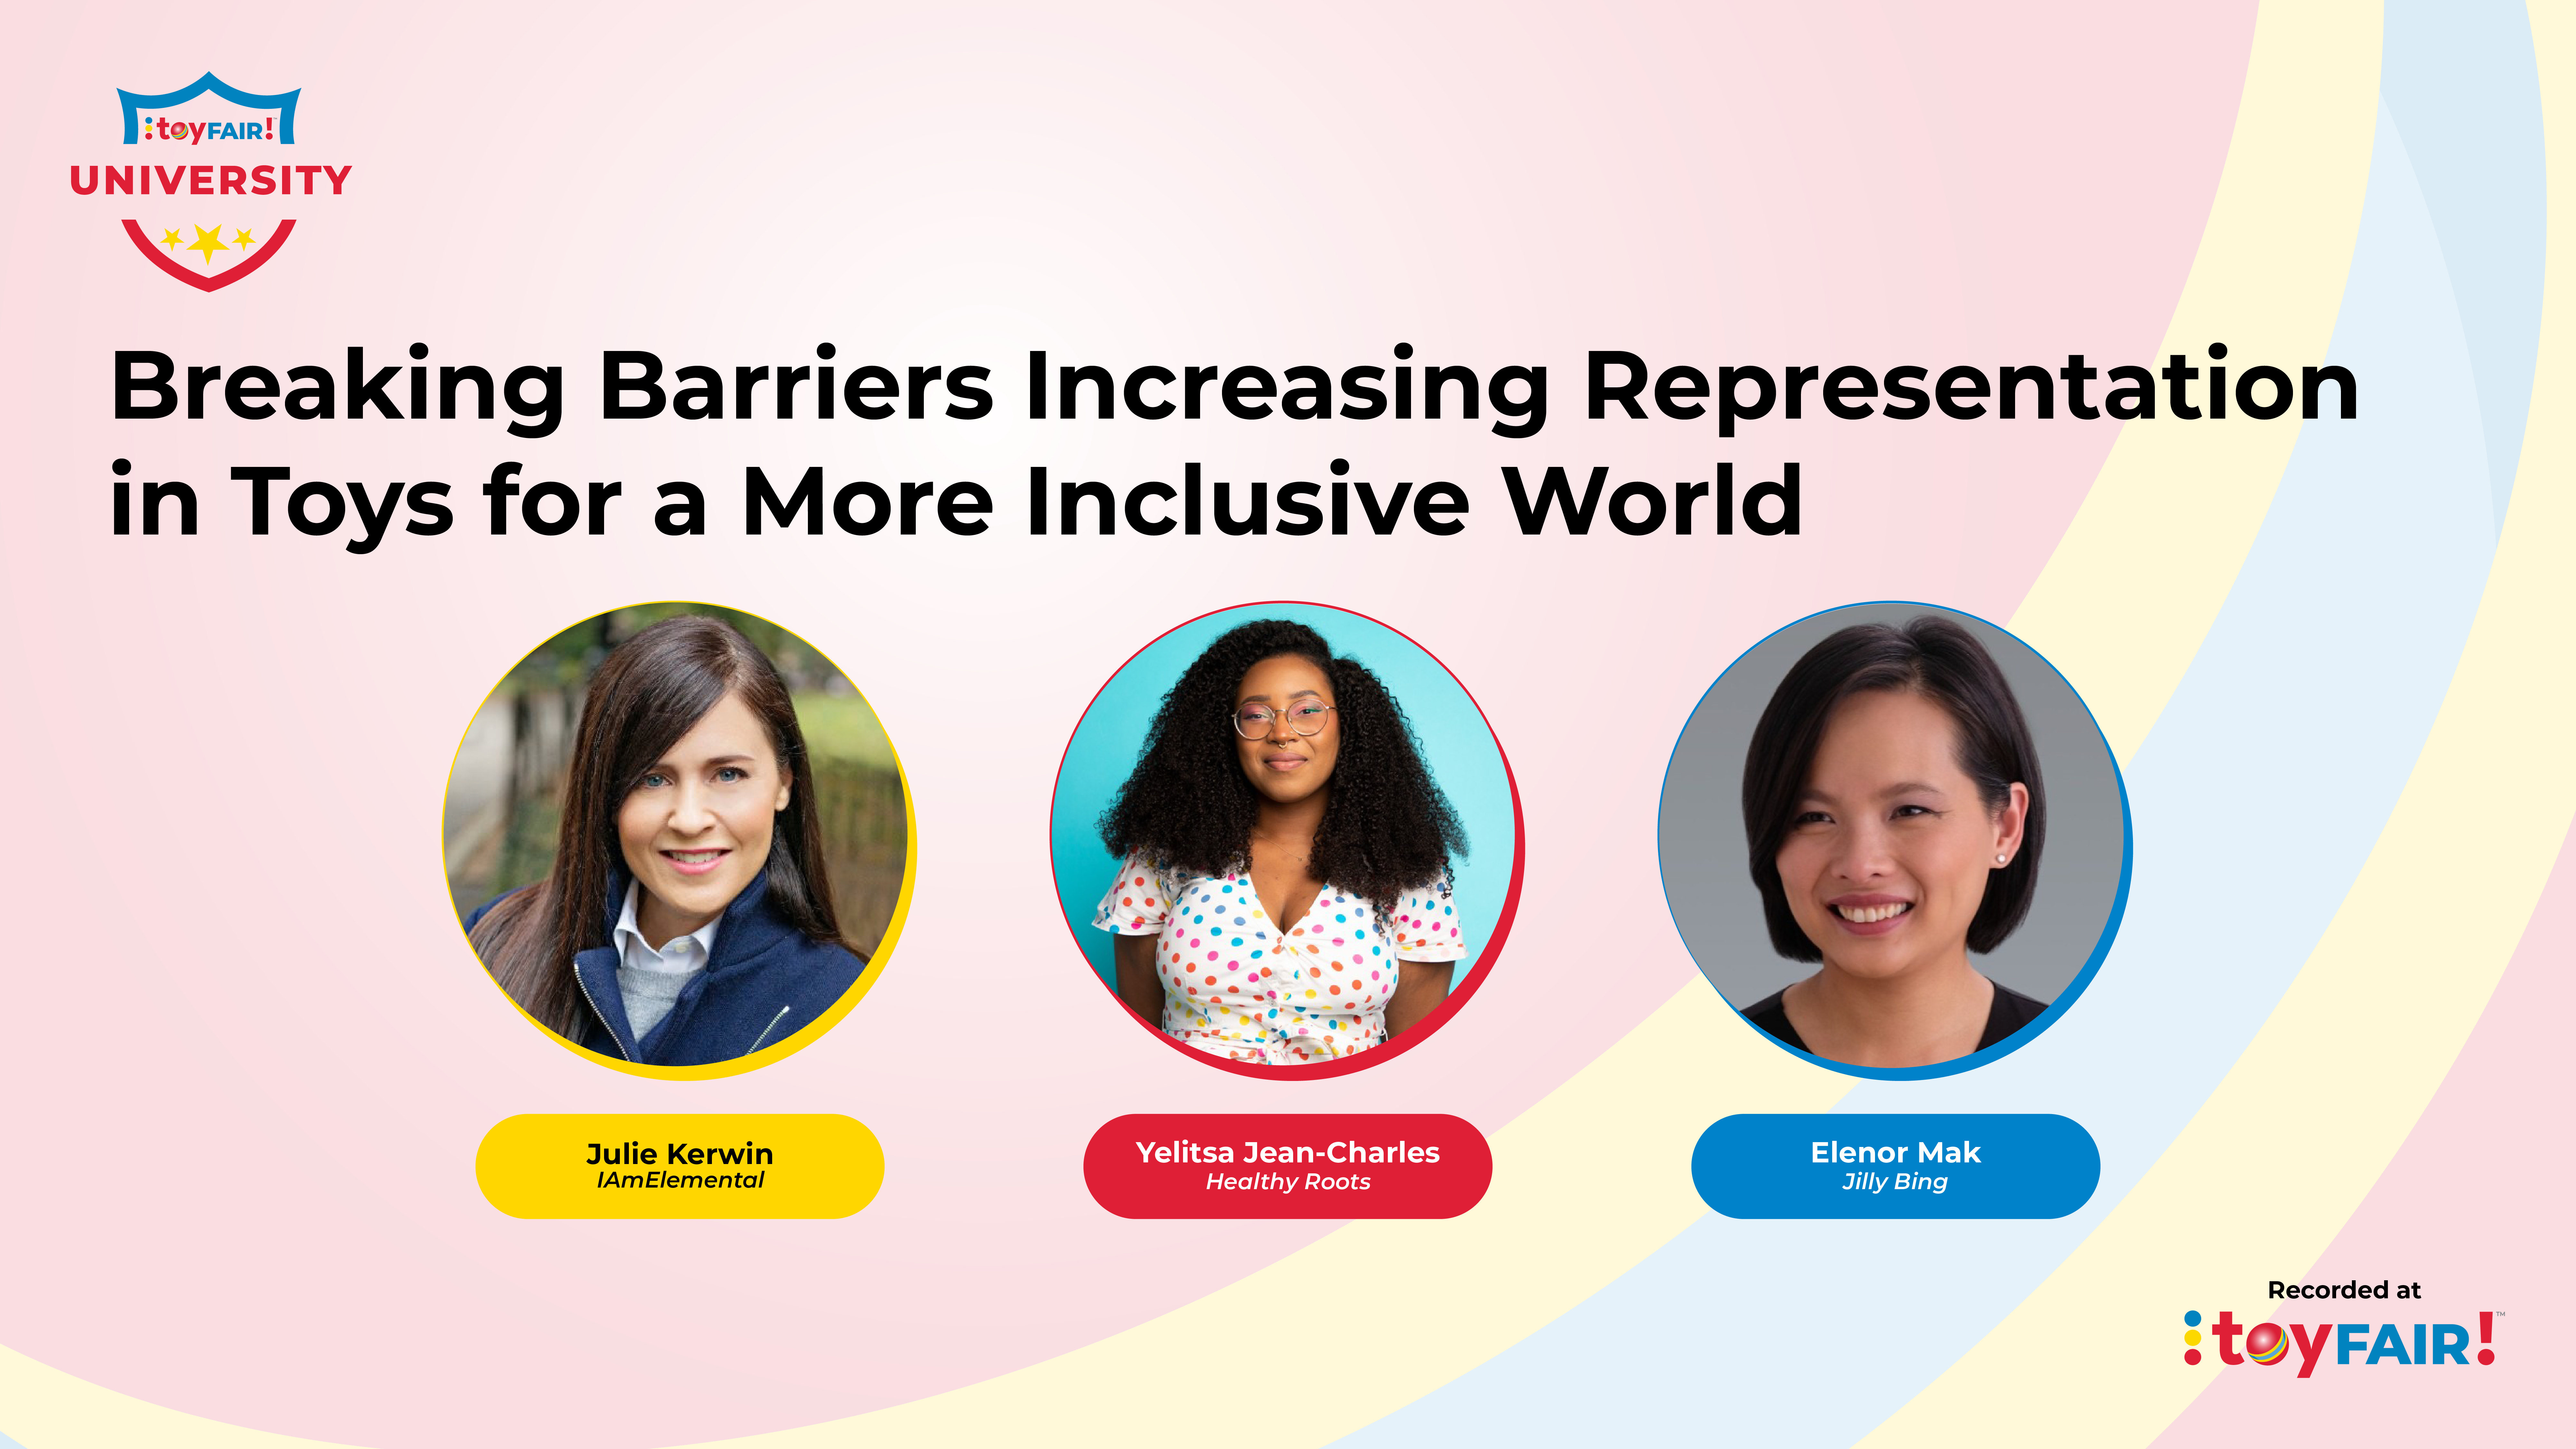 Breaking Barriers Increasing Representation in Toys for a More Inclusive World